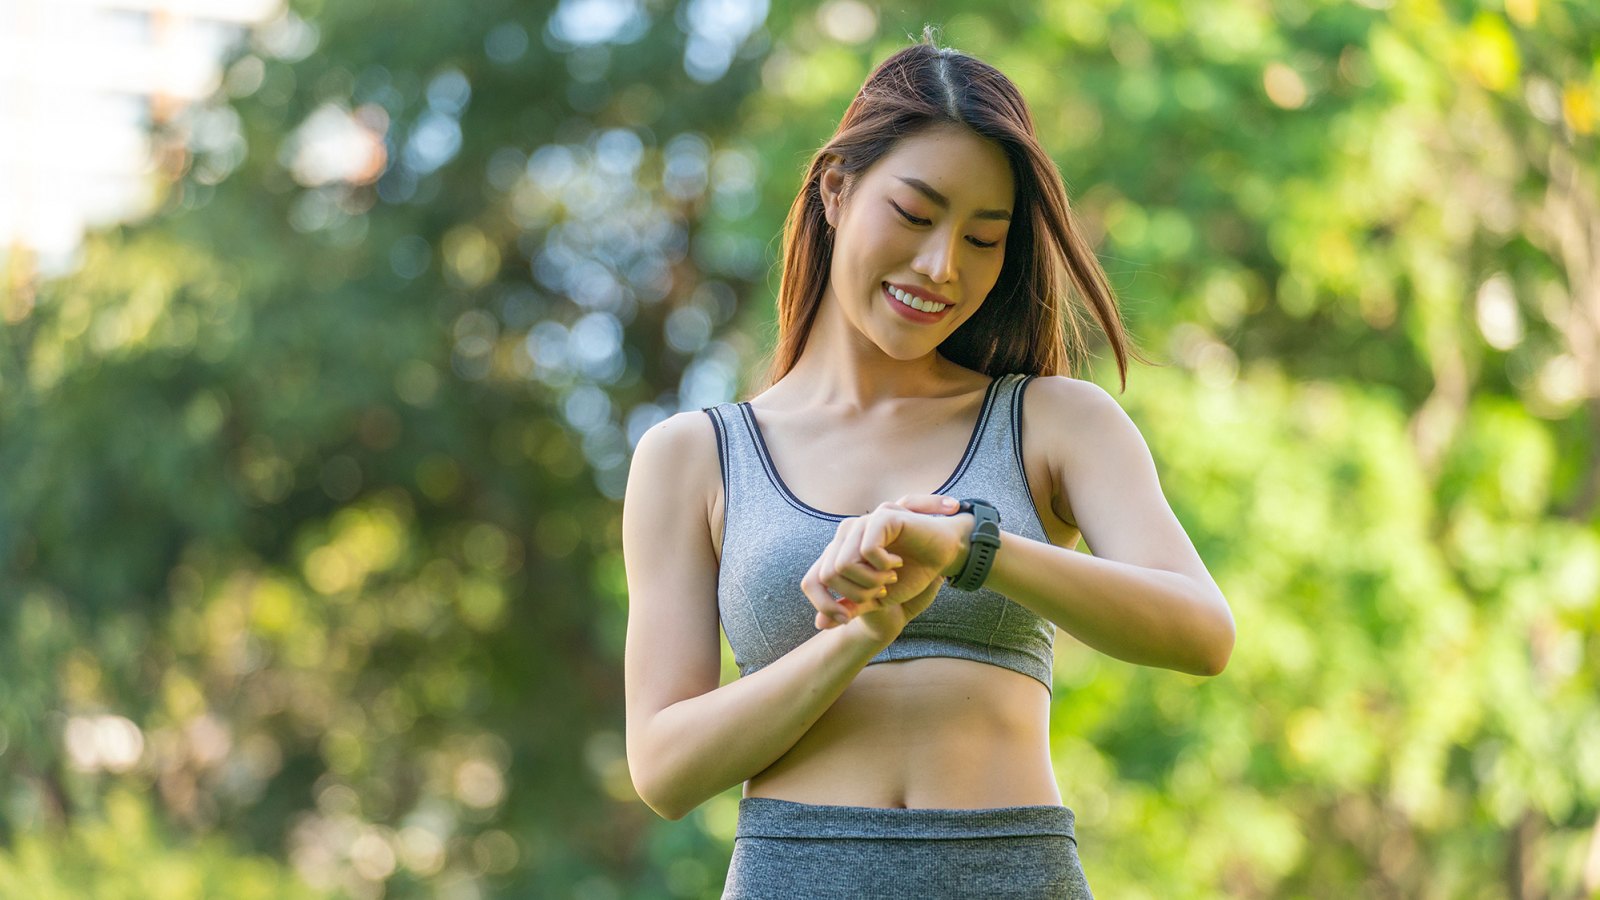 Portrait of a Young Woman in Sportswear and Smartwatch Enjoying Healthy Living and Exercise, Radiating Happiness and Positivity During Leisure Exercise in a Public Park at Sunset. Positive Vibes. Enjoying Healthy Living And Outdoor Wellbeing. Smart Wellness.